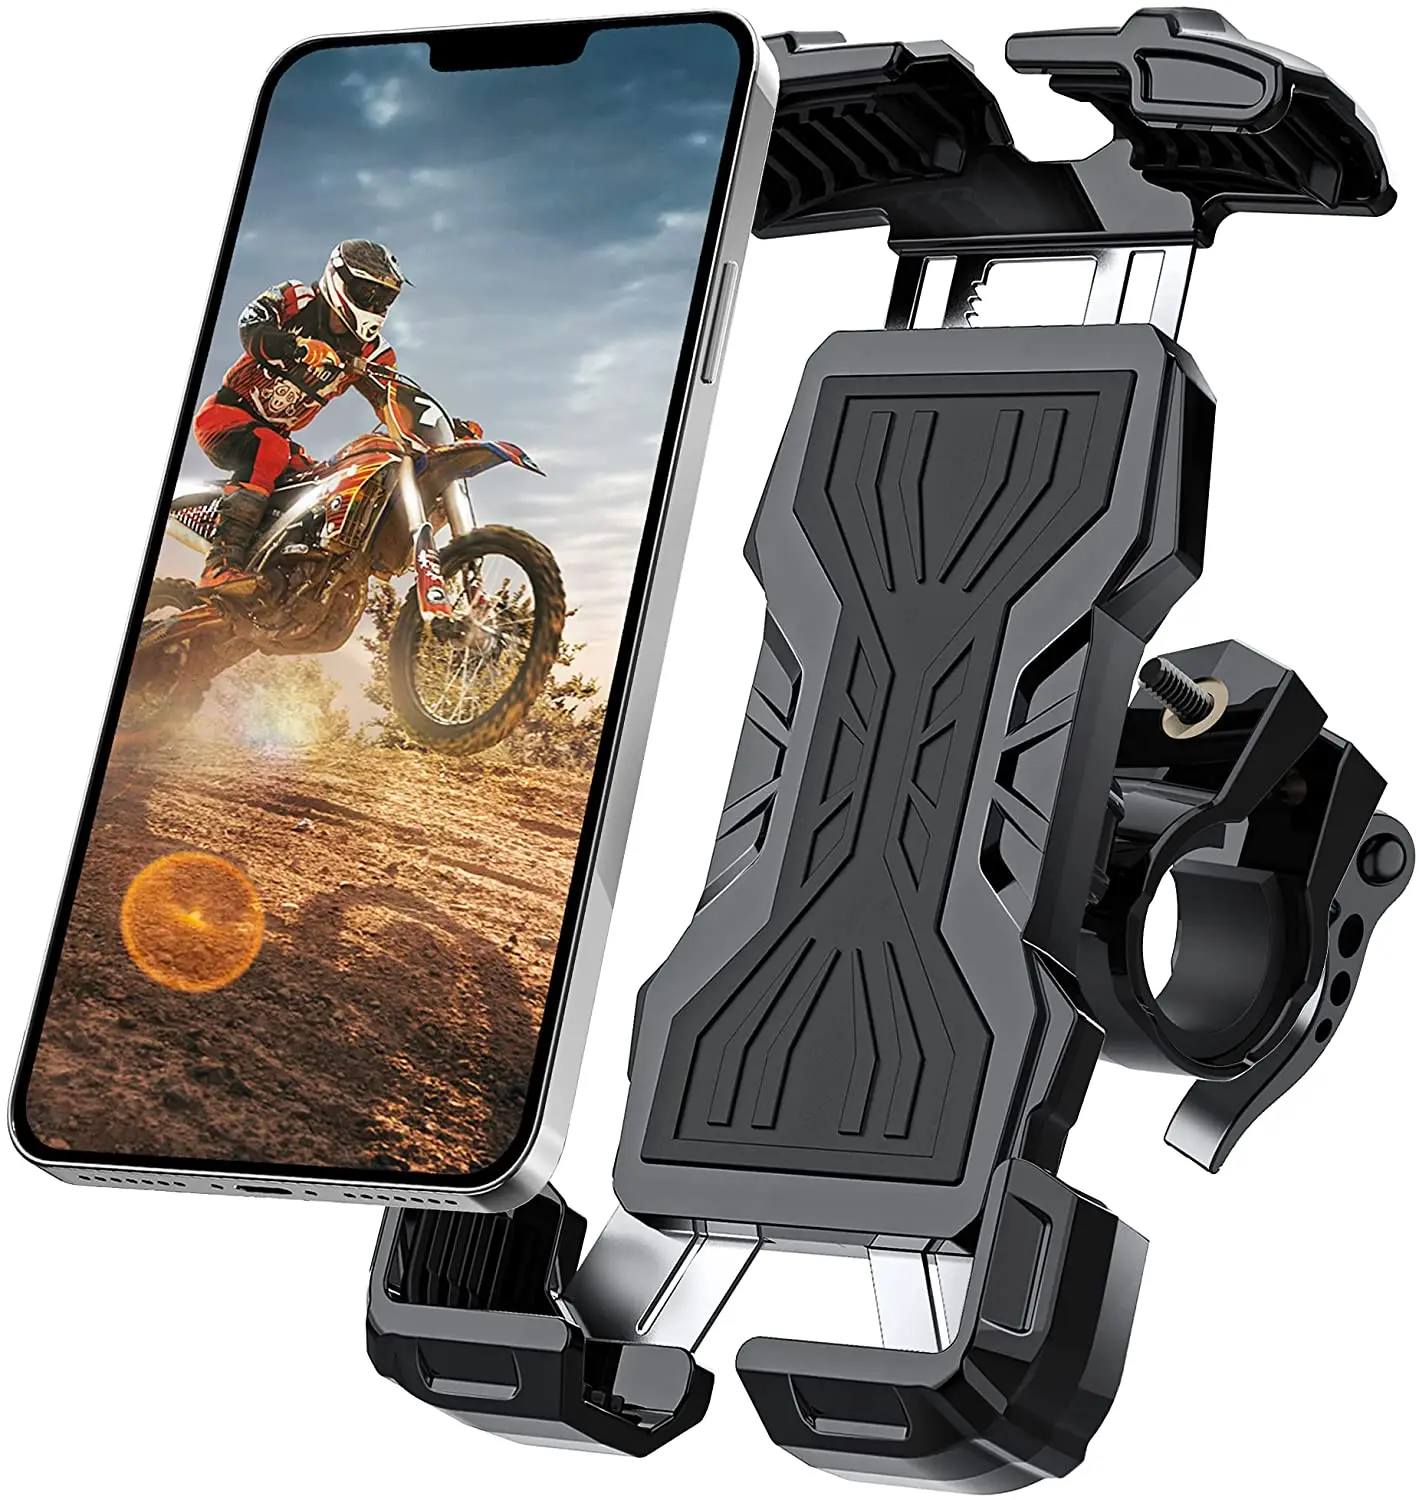 Carry Raffinaderij microscopisch Bike Phone Holder Bicycle Mobile Cellphone Holder Motorcycle Suporte  Celular For iPhone Samsung Xiaomi Gsm Houder Fiets|Phone Holders & Stands|  - AliExpress